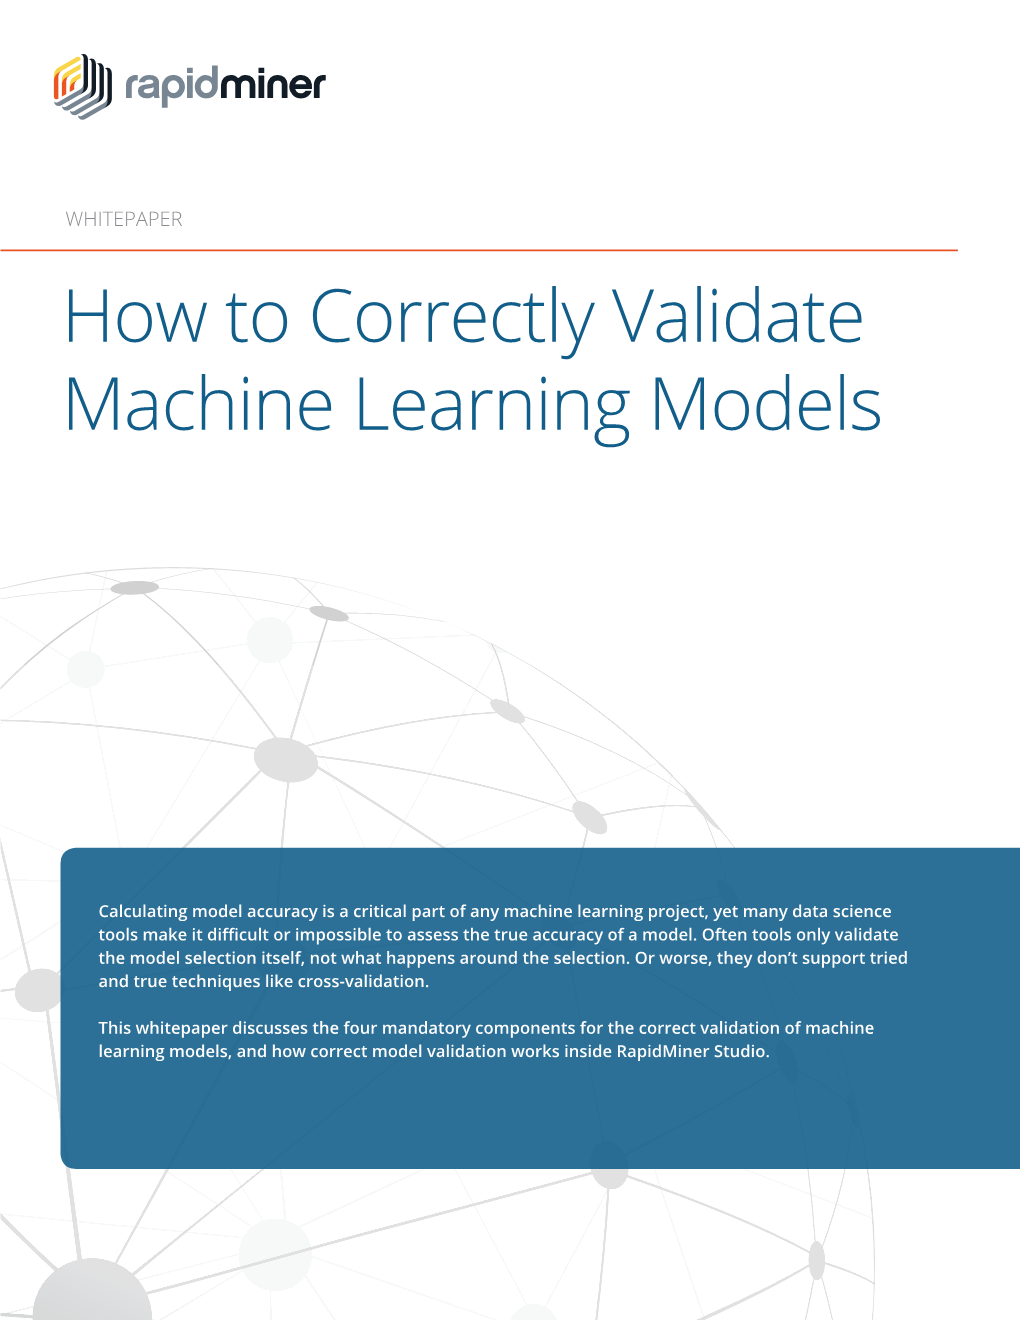 How to Correctly Validate Machine Learning Models